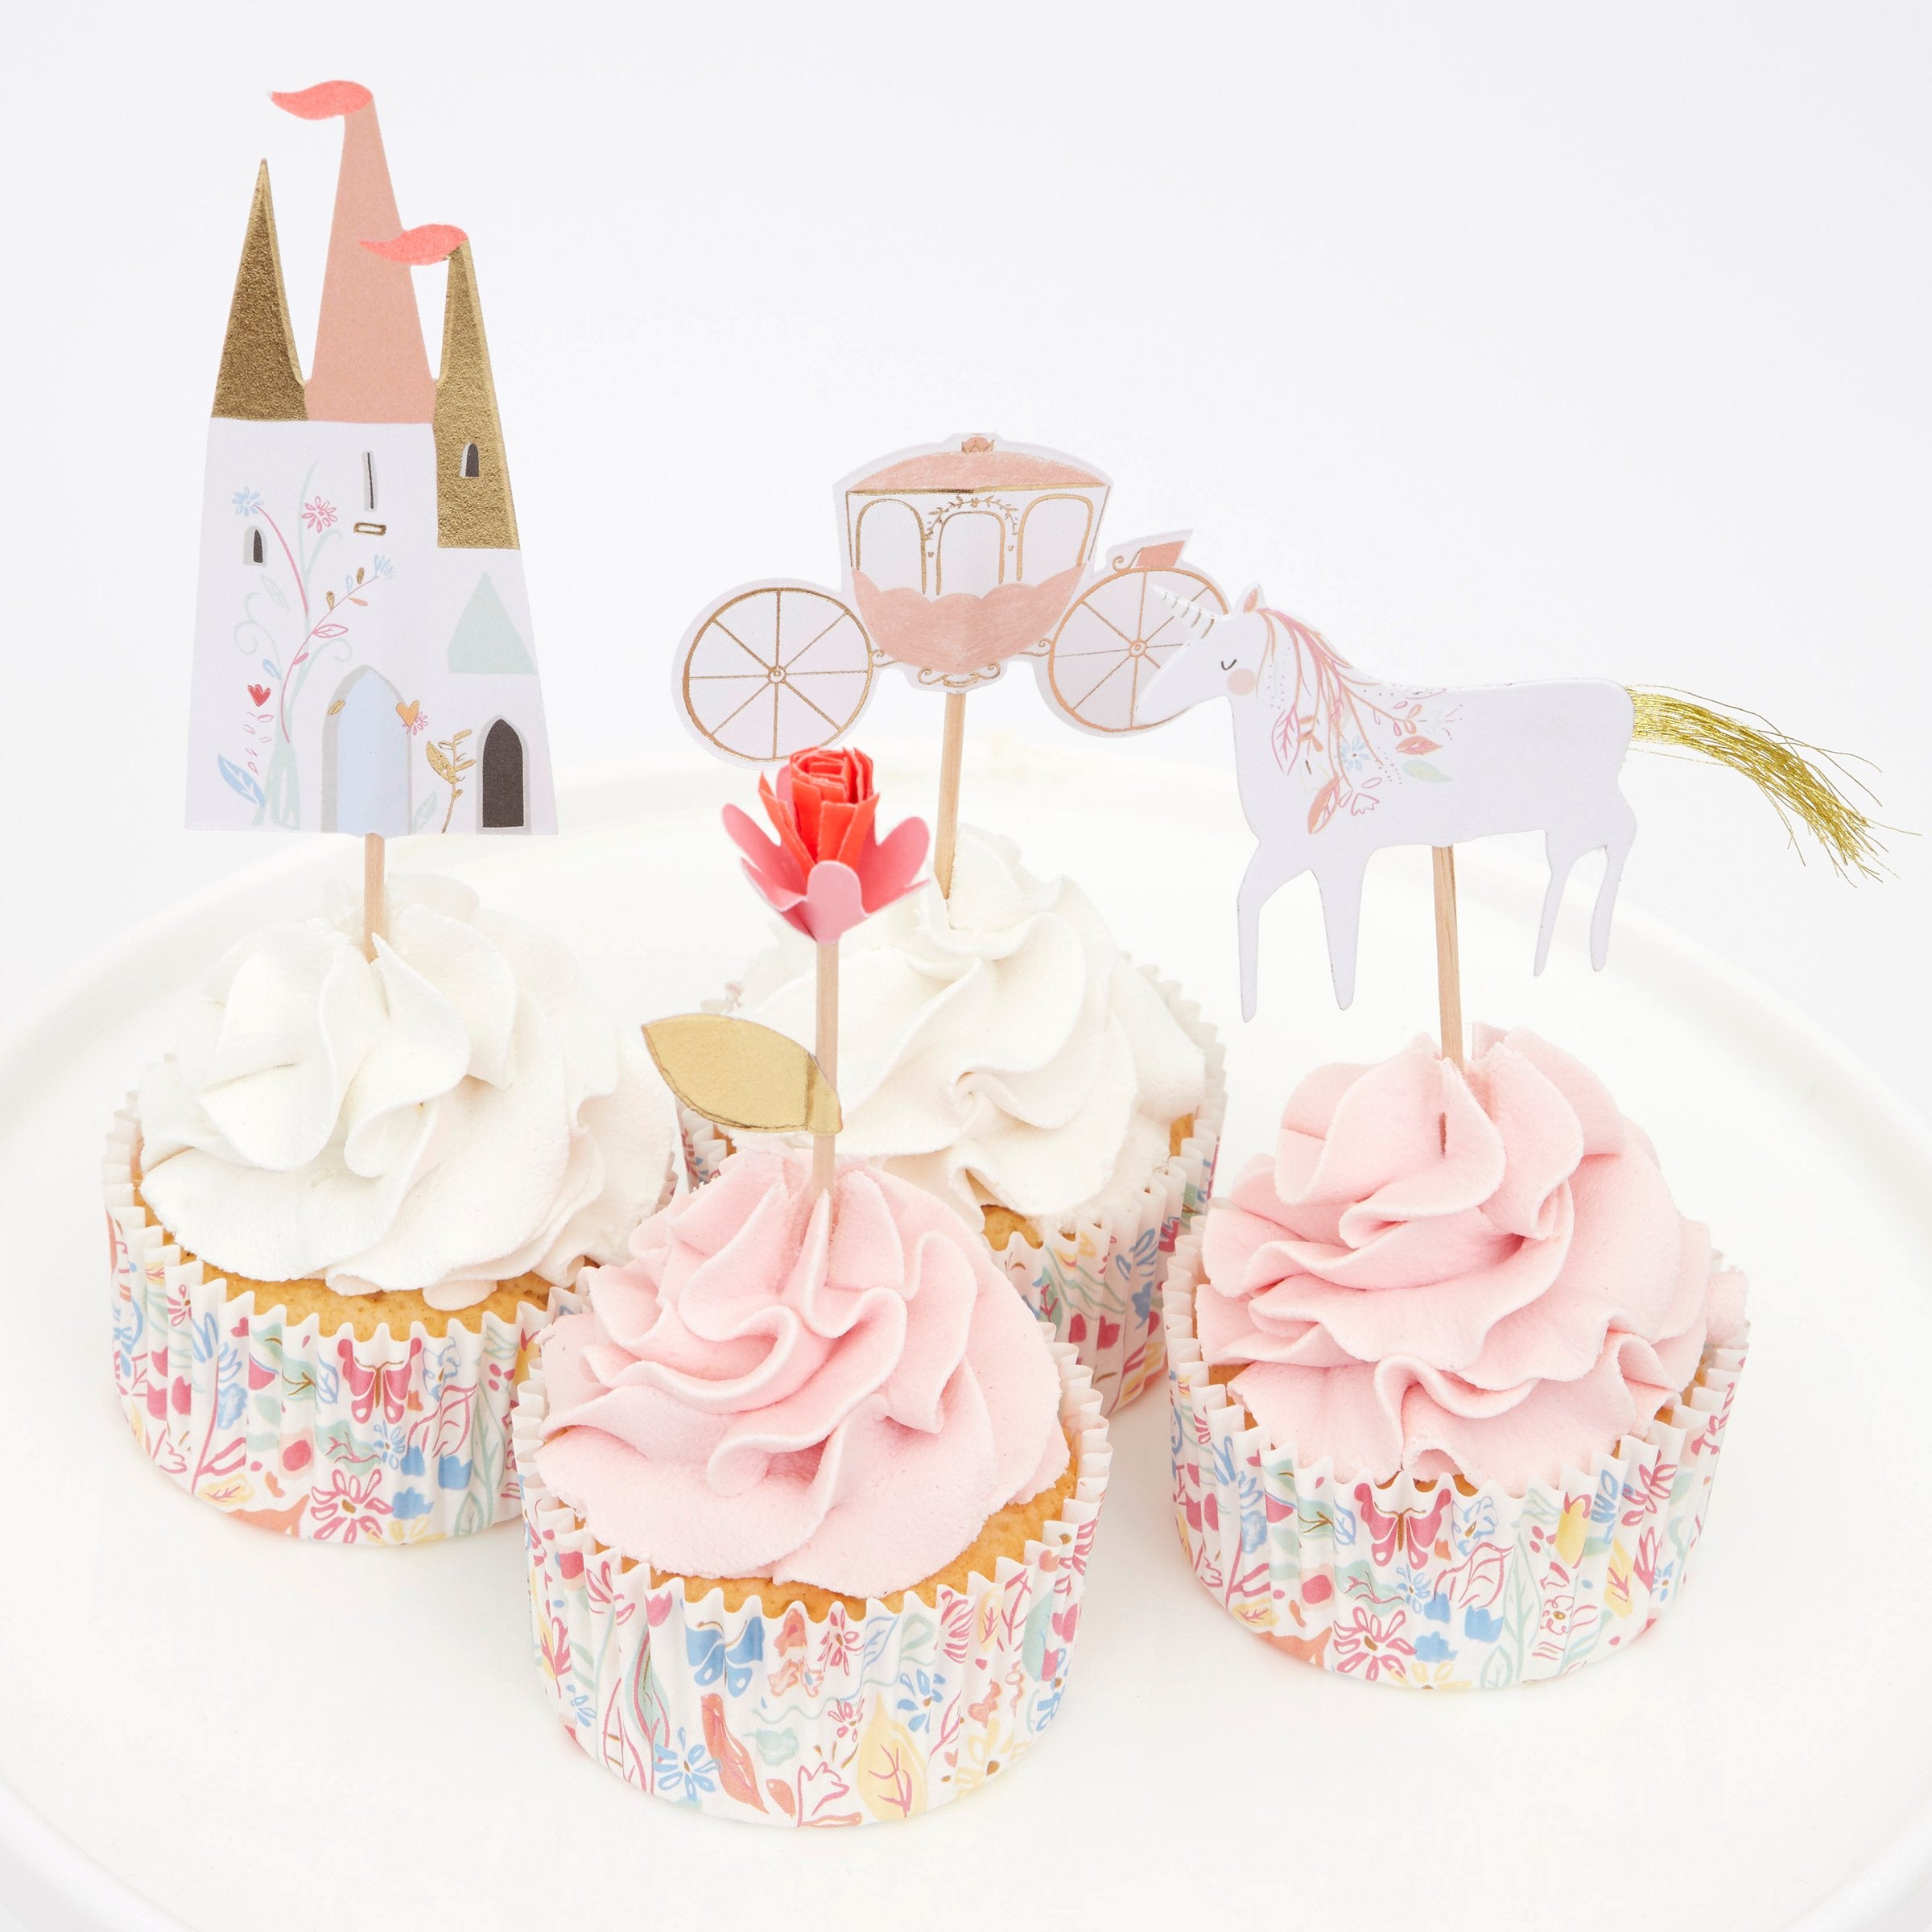 This princess cupcake kit includes carriage, flower, castle and unicorn cake toppers and coordinating cupcake cases.